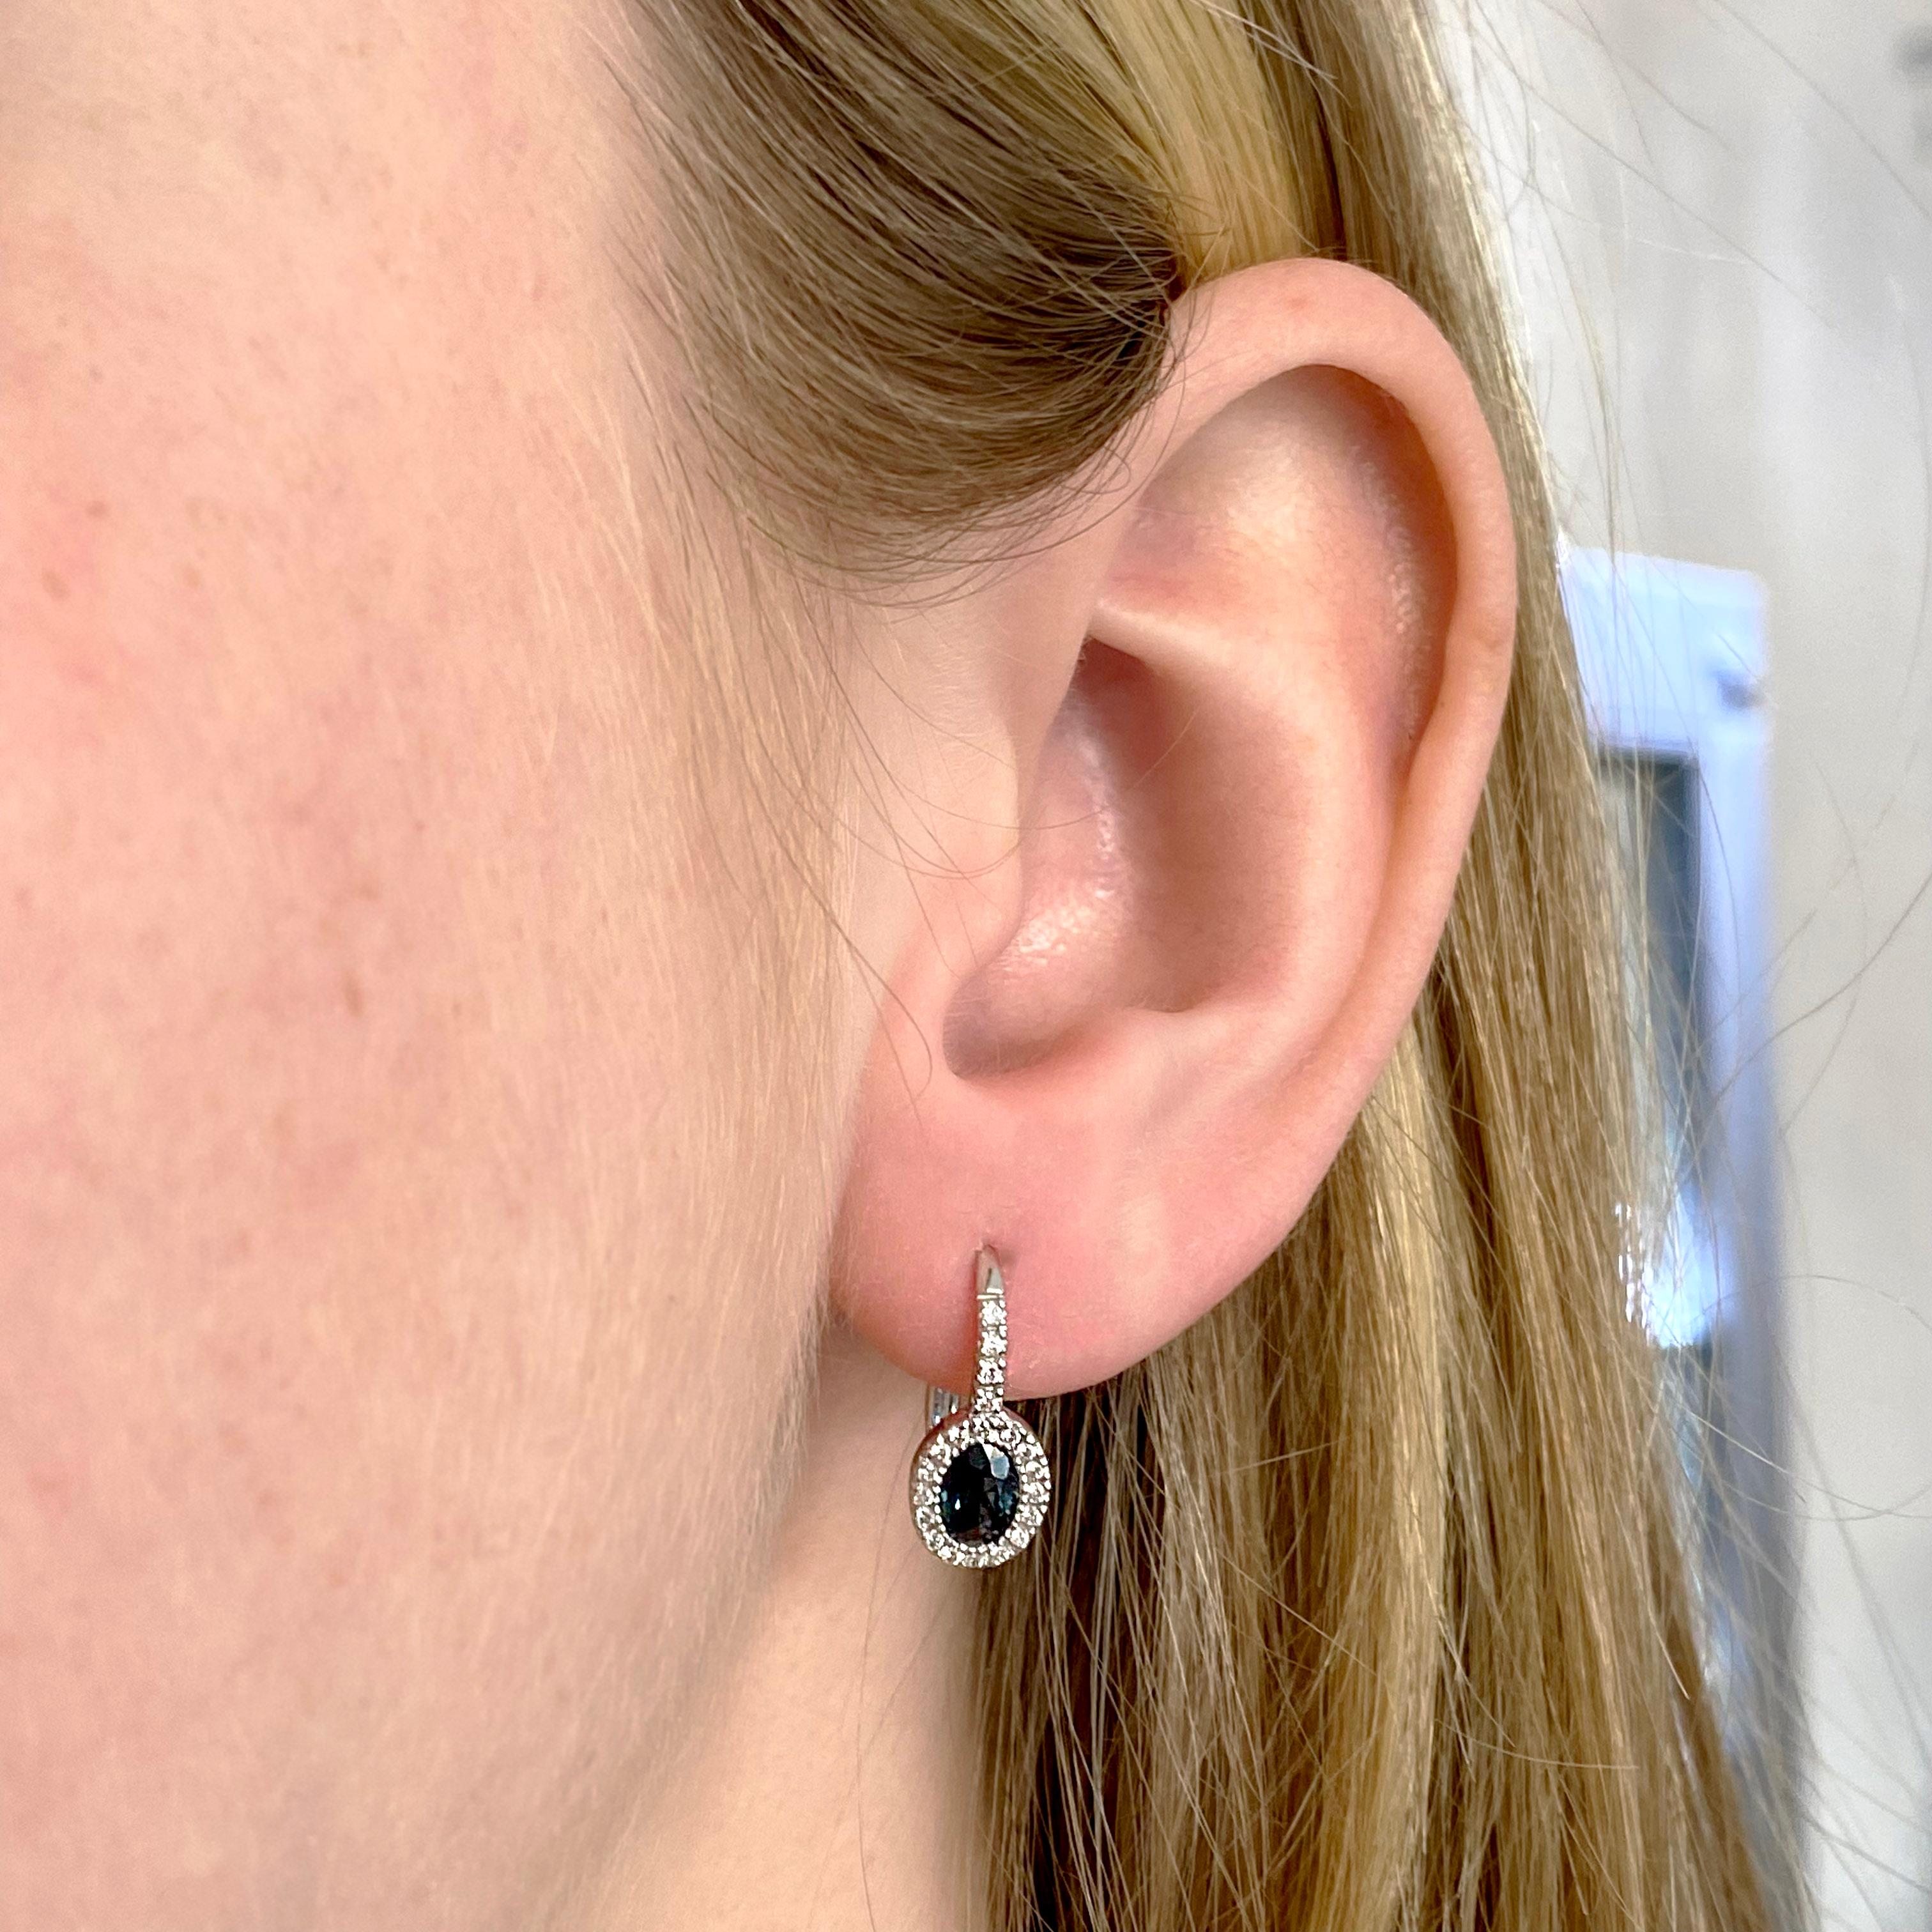 These dangle earrings are absolutely gorgeous on any skin tone. The precious, deep blue sapphire looks stunning and perfectly contrasts the surrounding diamond halo. The details for these earrings are listed below: 
Earrings: 1 Set
Metal Quality: 14